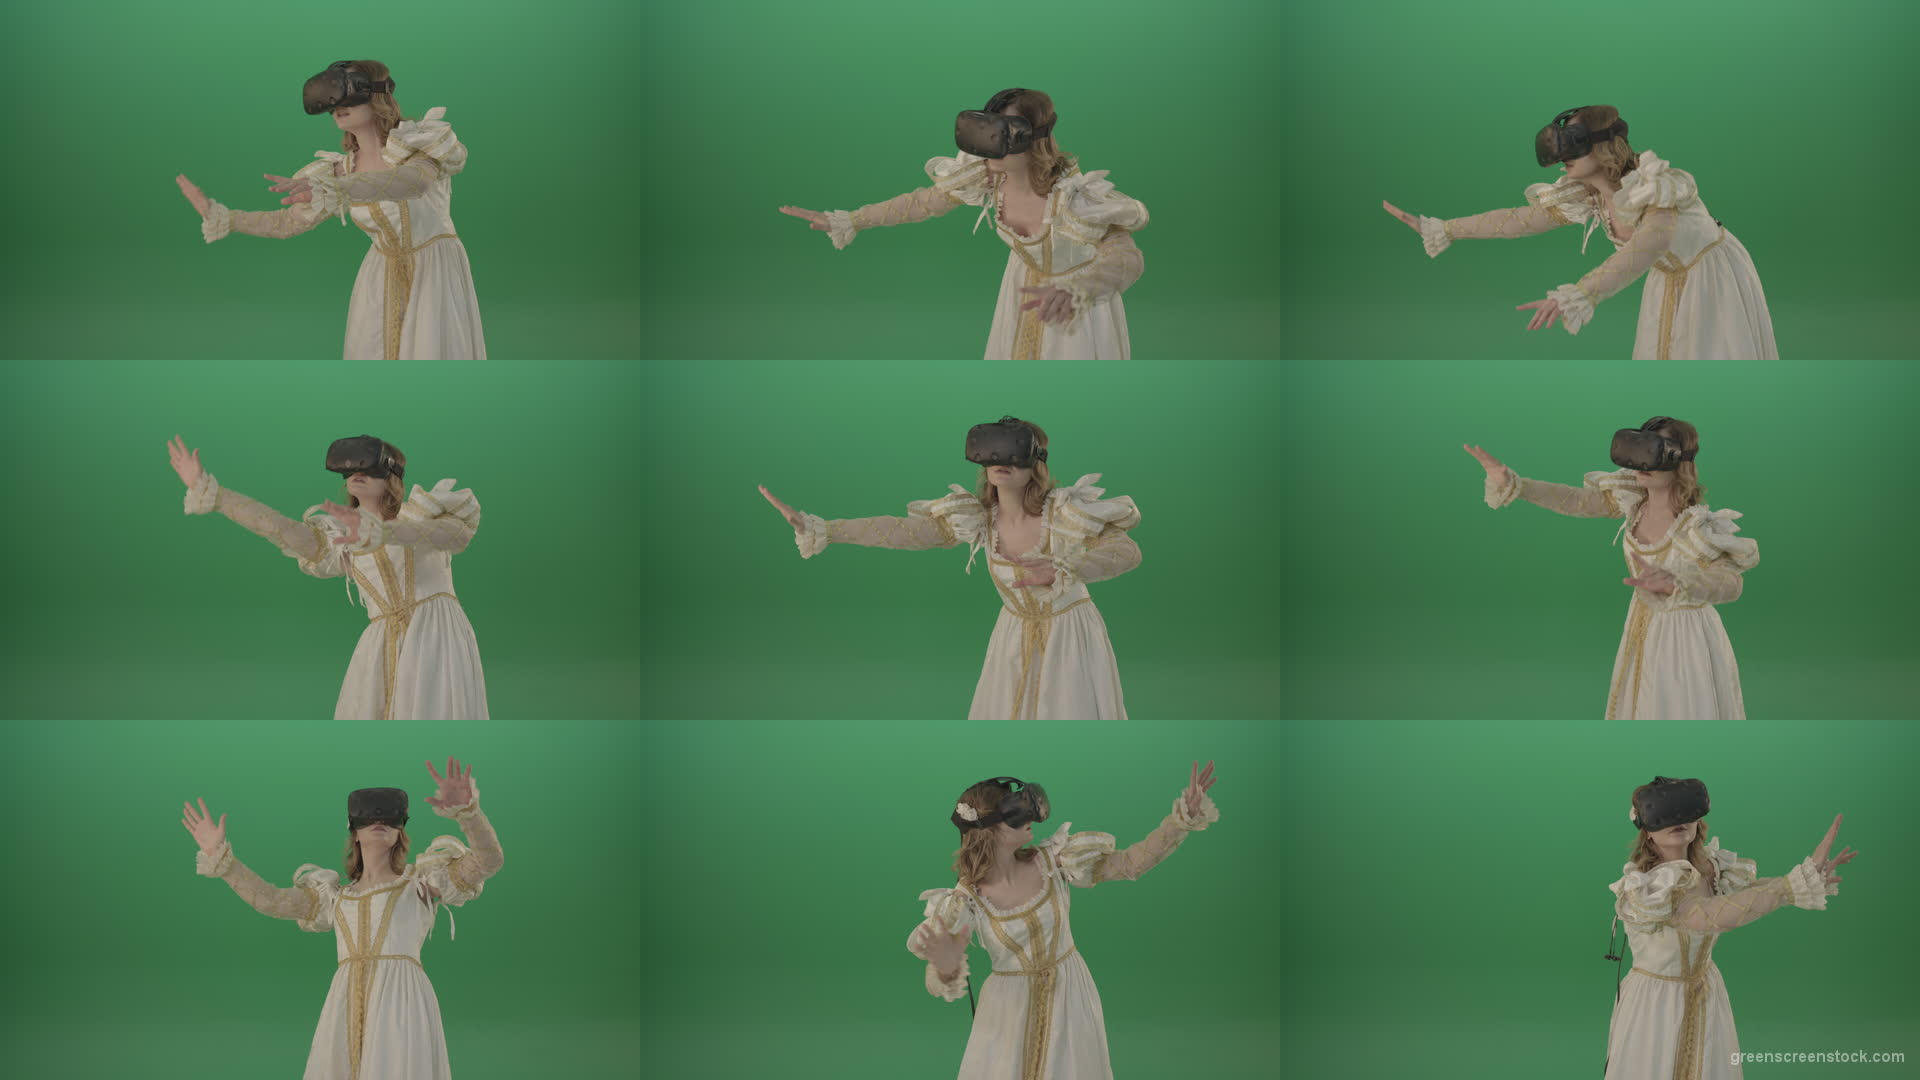 3d-glasses-of-virtual-reality-the-girl-looked-into-the-virtual-world-isolated-on-green-screen Green Screen Stock